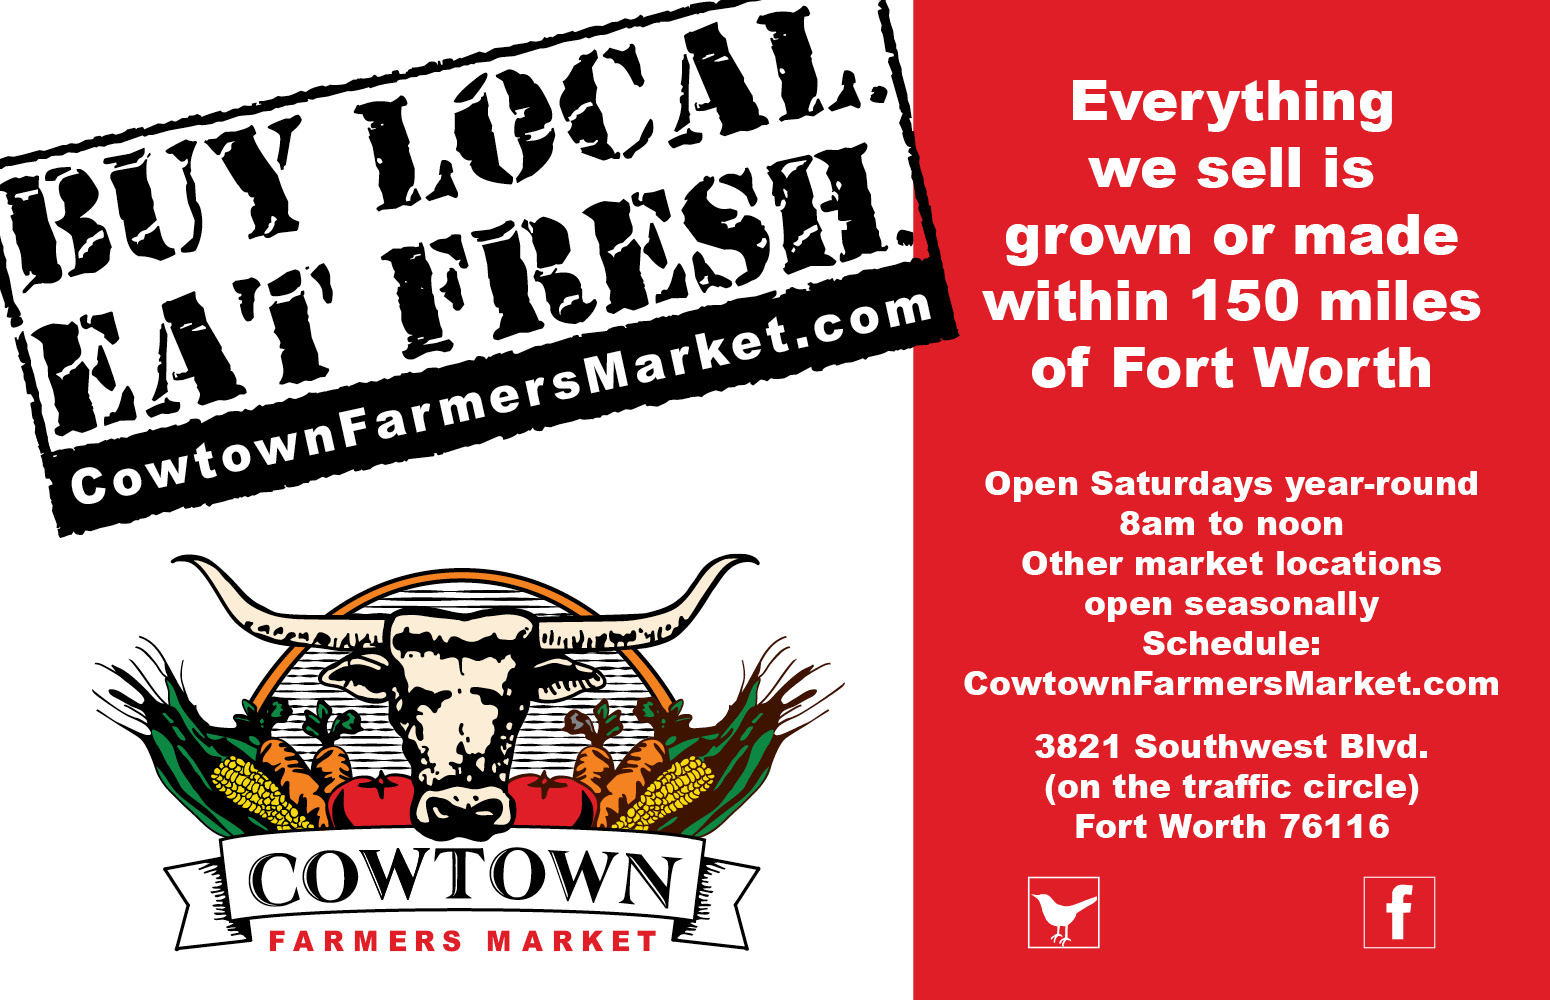 Cowtown Farmers Market ad for Fort Worth Foodie